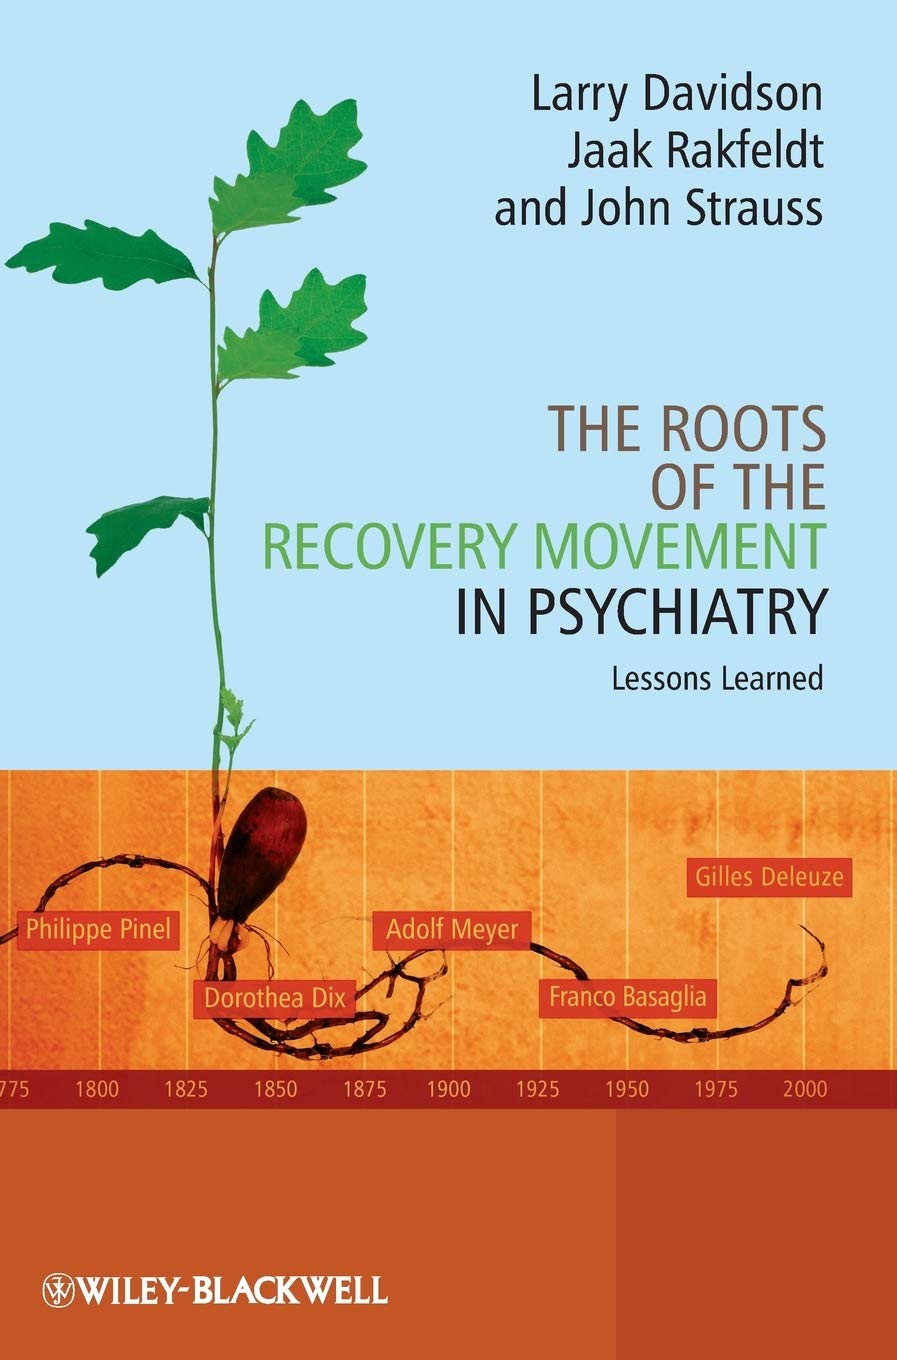 The Roots of the Recovery Movement in Psychiatry: Lessons Learned